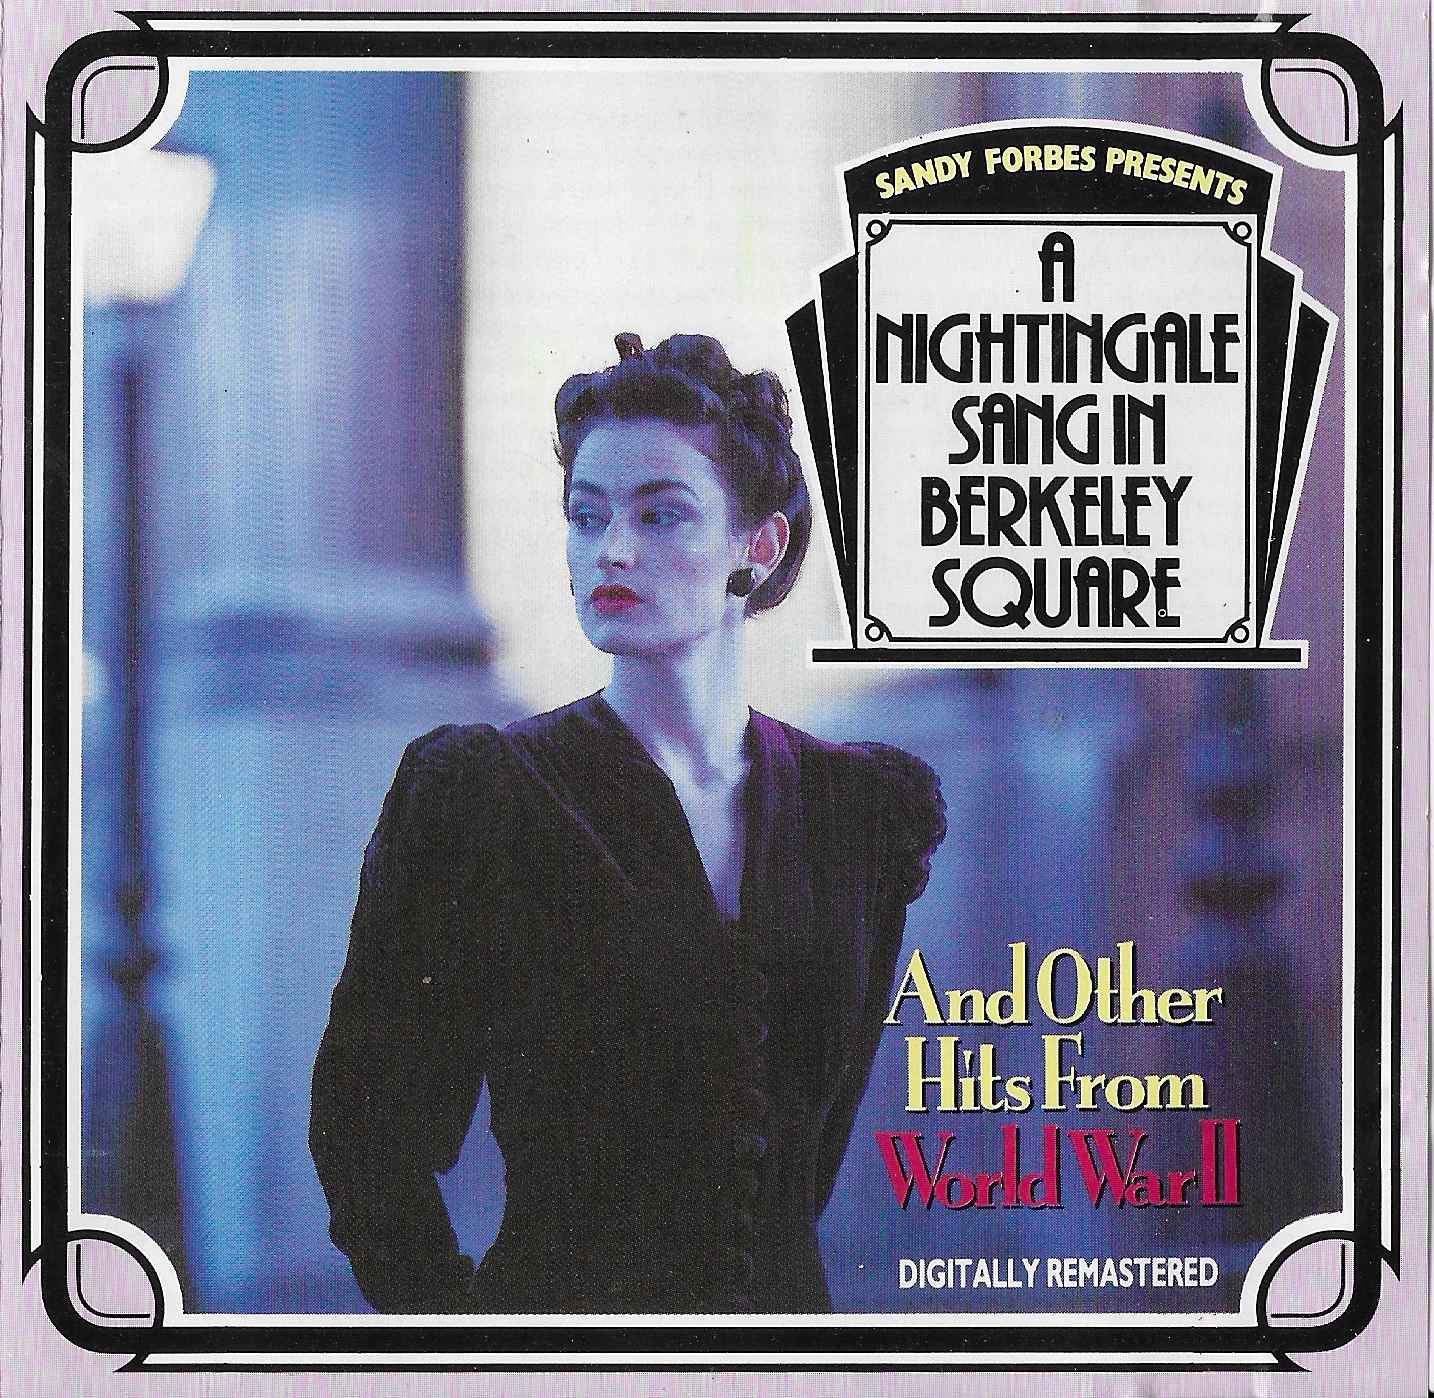 Picture of PWKS 659 Nightingale sang Berkeley Square and other hits from World War II by artist Vile Bodies from the BBC cds - Records and Tapes library